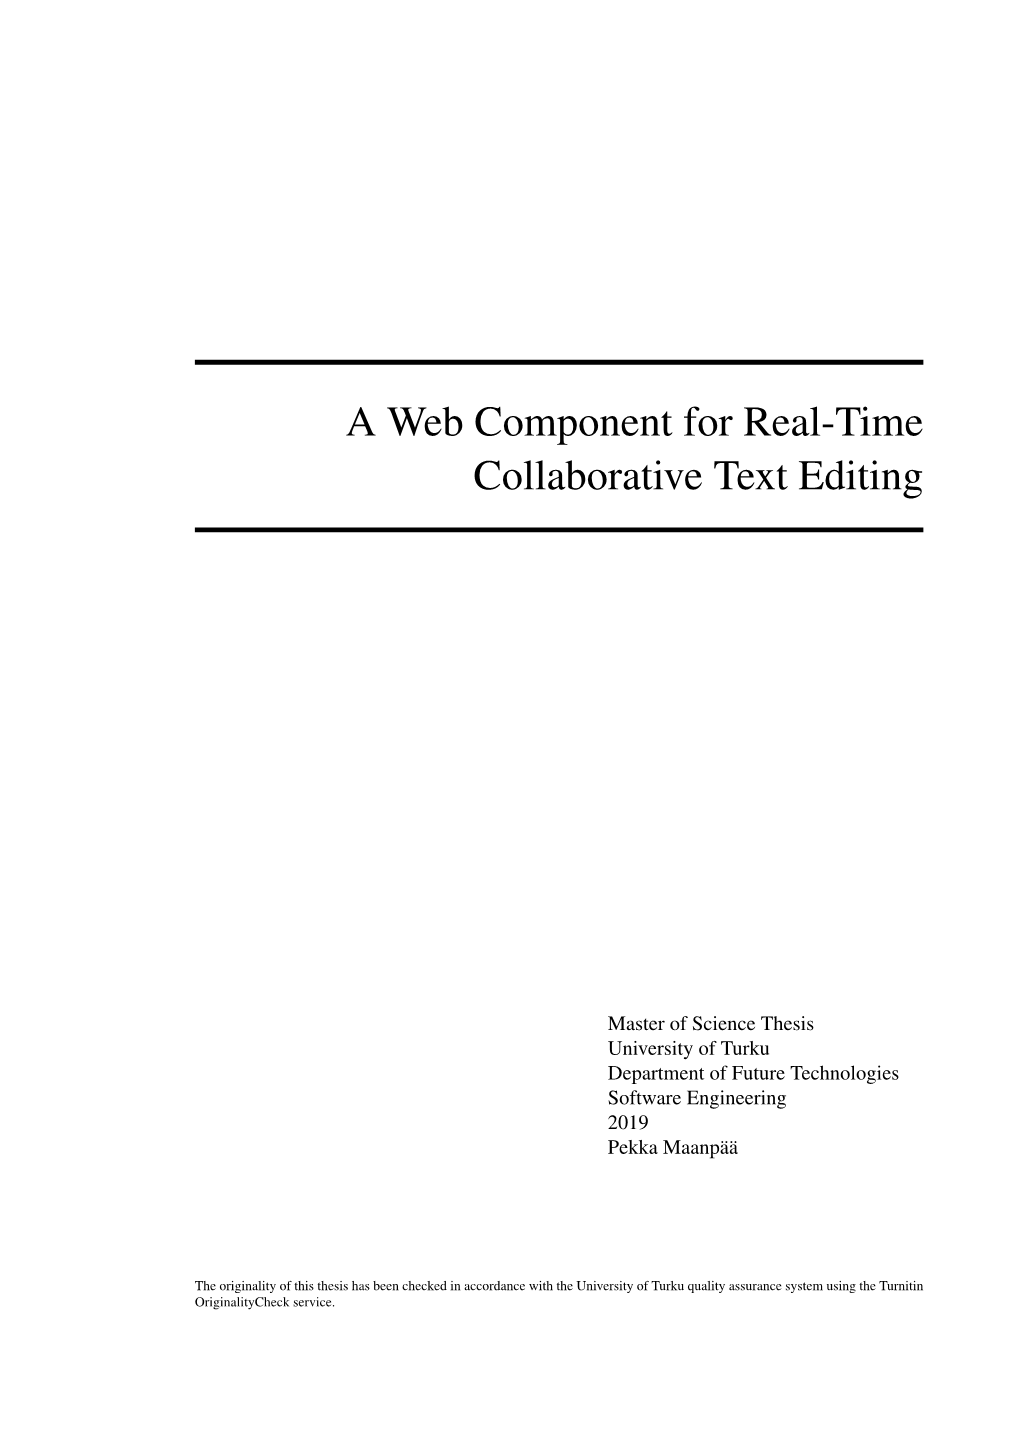 A Web Component for Real-Time Collaborative Text Editing